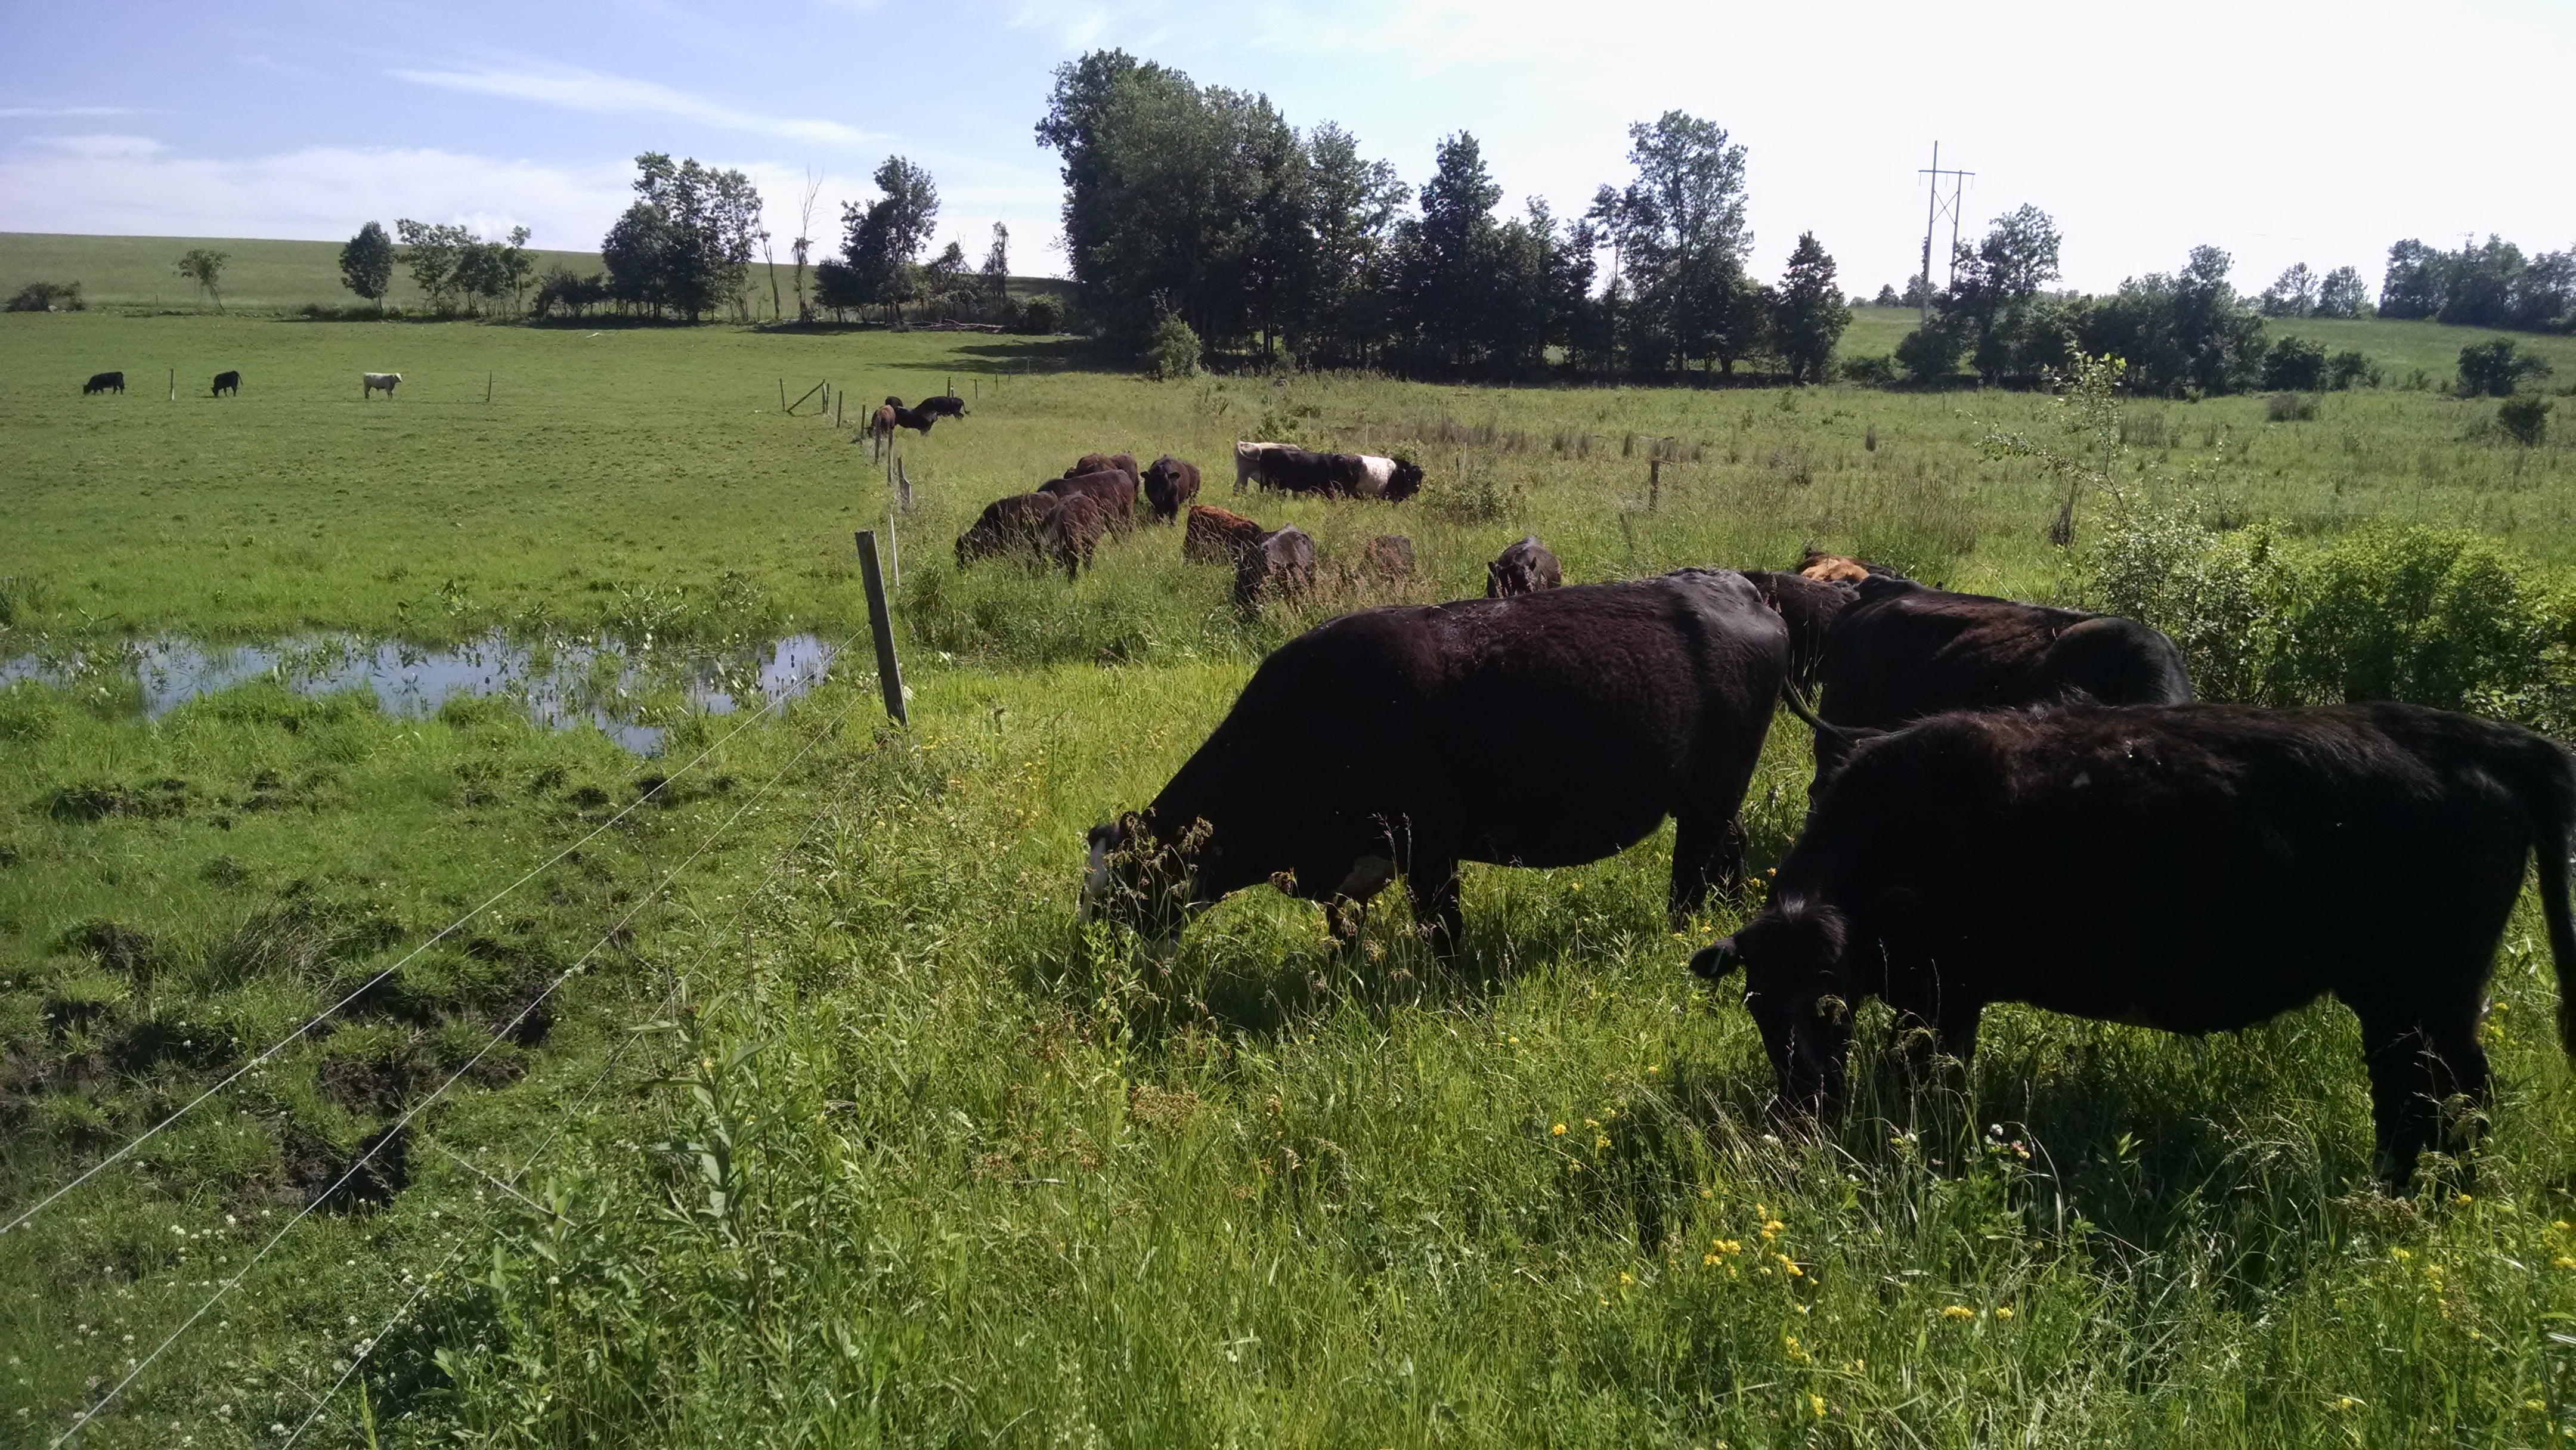 Grazing between the pastures is easier than brush hogging, especially this year when the puddles are a few feet deep.